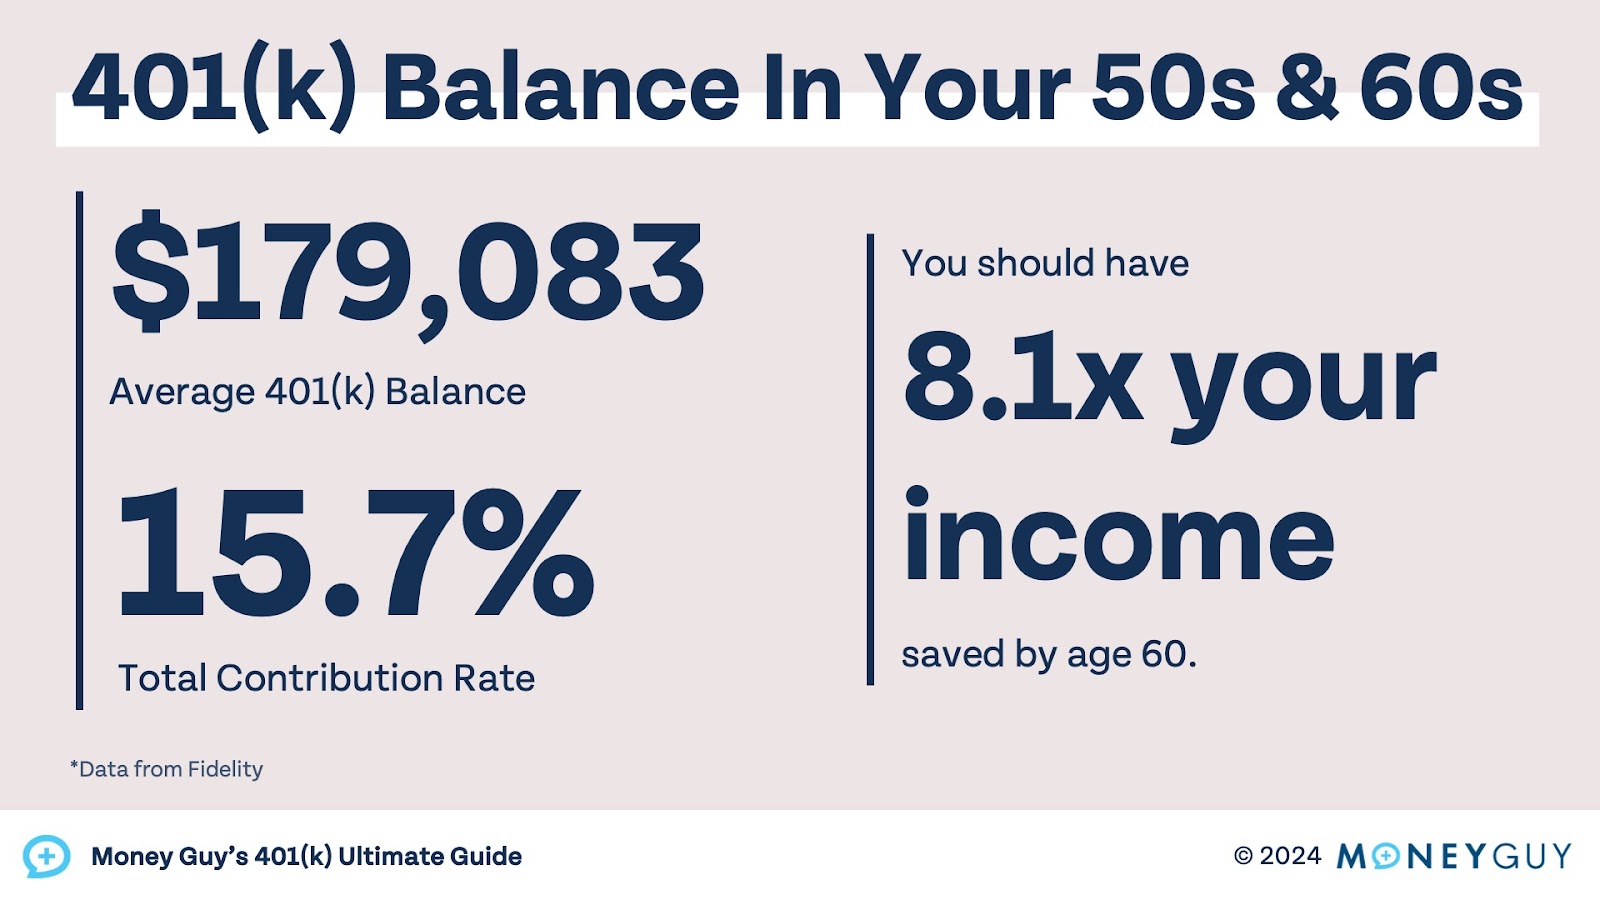 This shows the average 401(k) balance by age in your 50s and 60s.